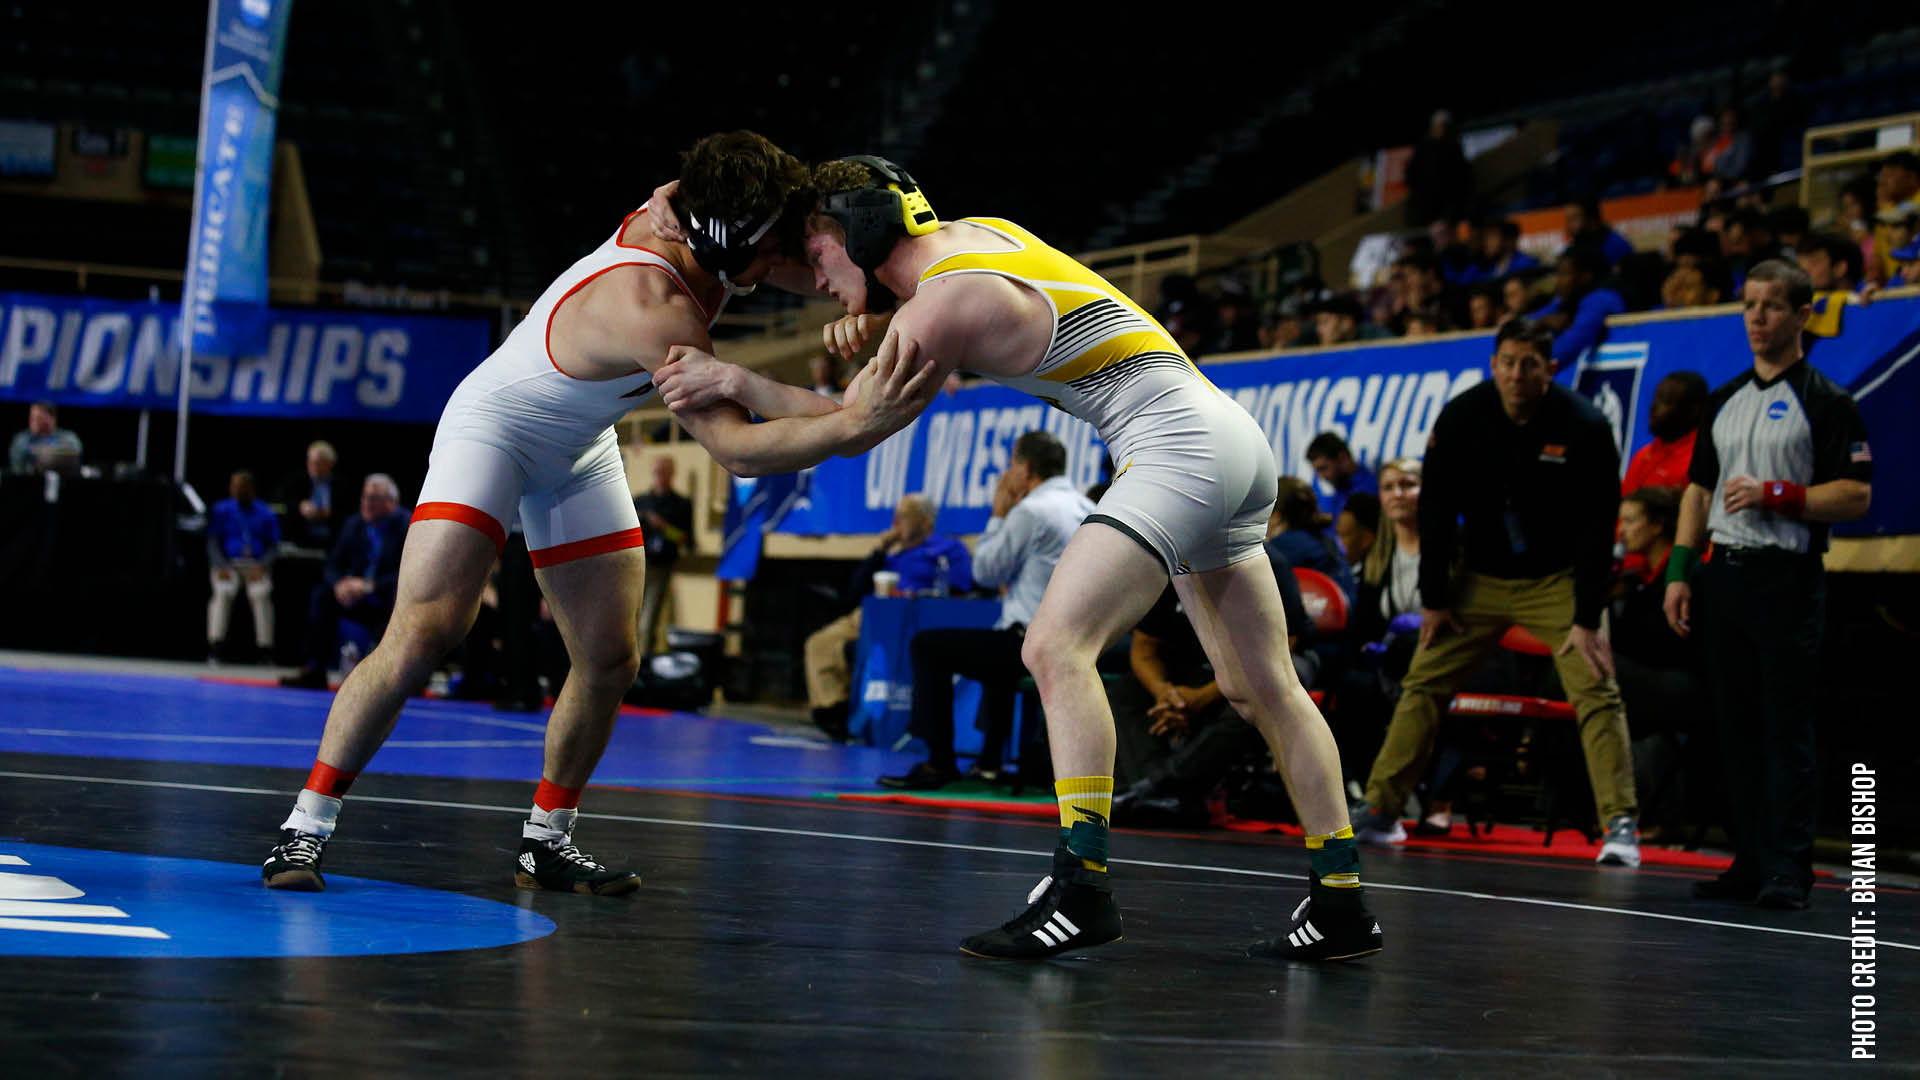 Yineman Places Seventh at NCAA Championships